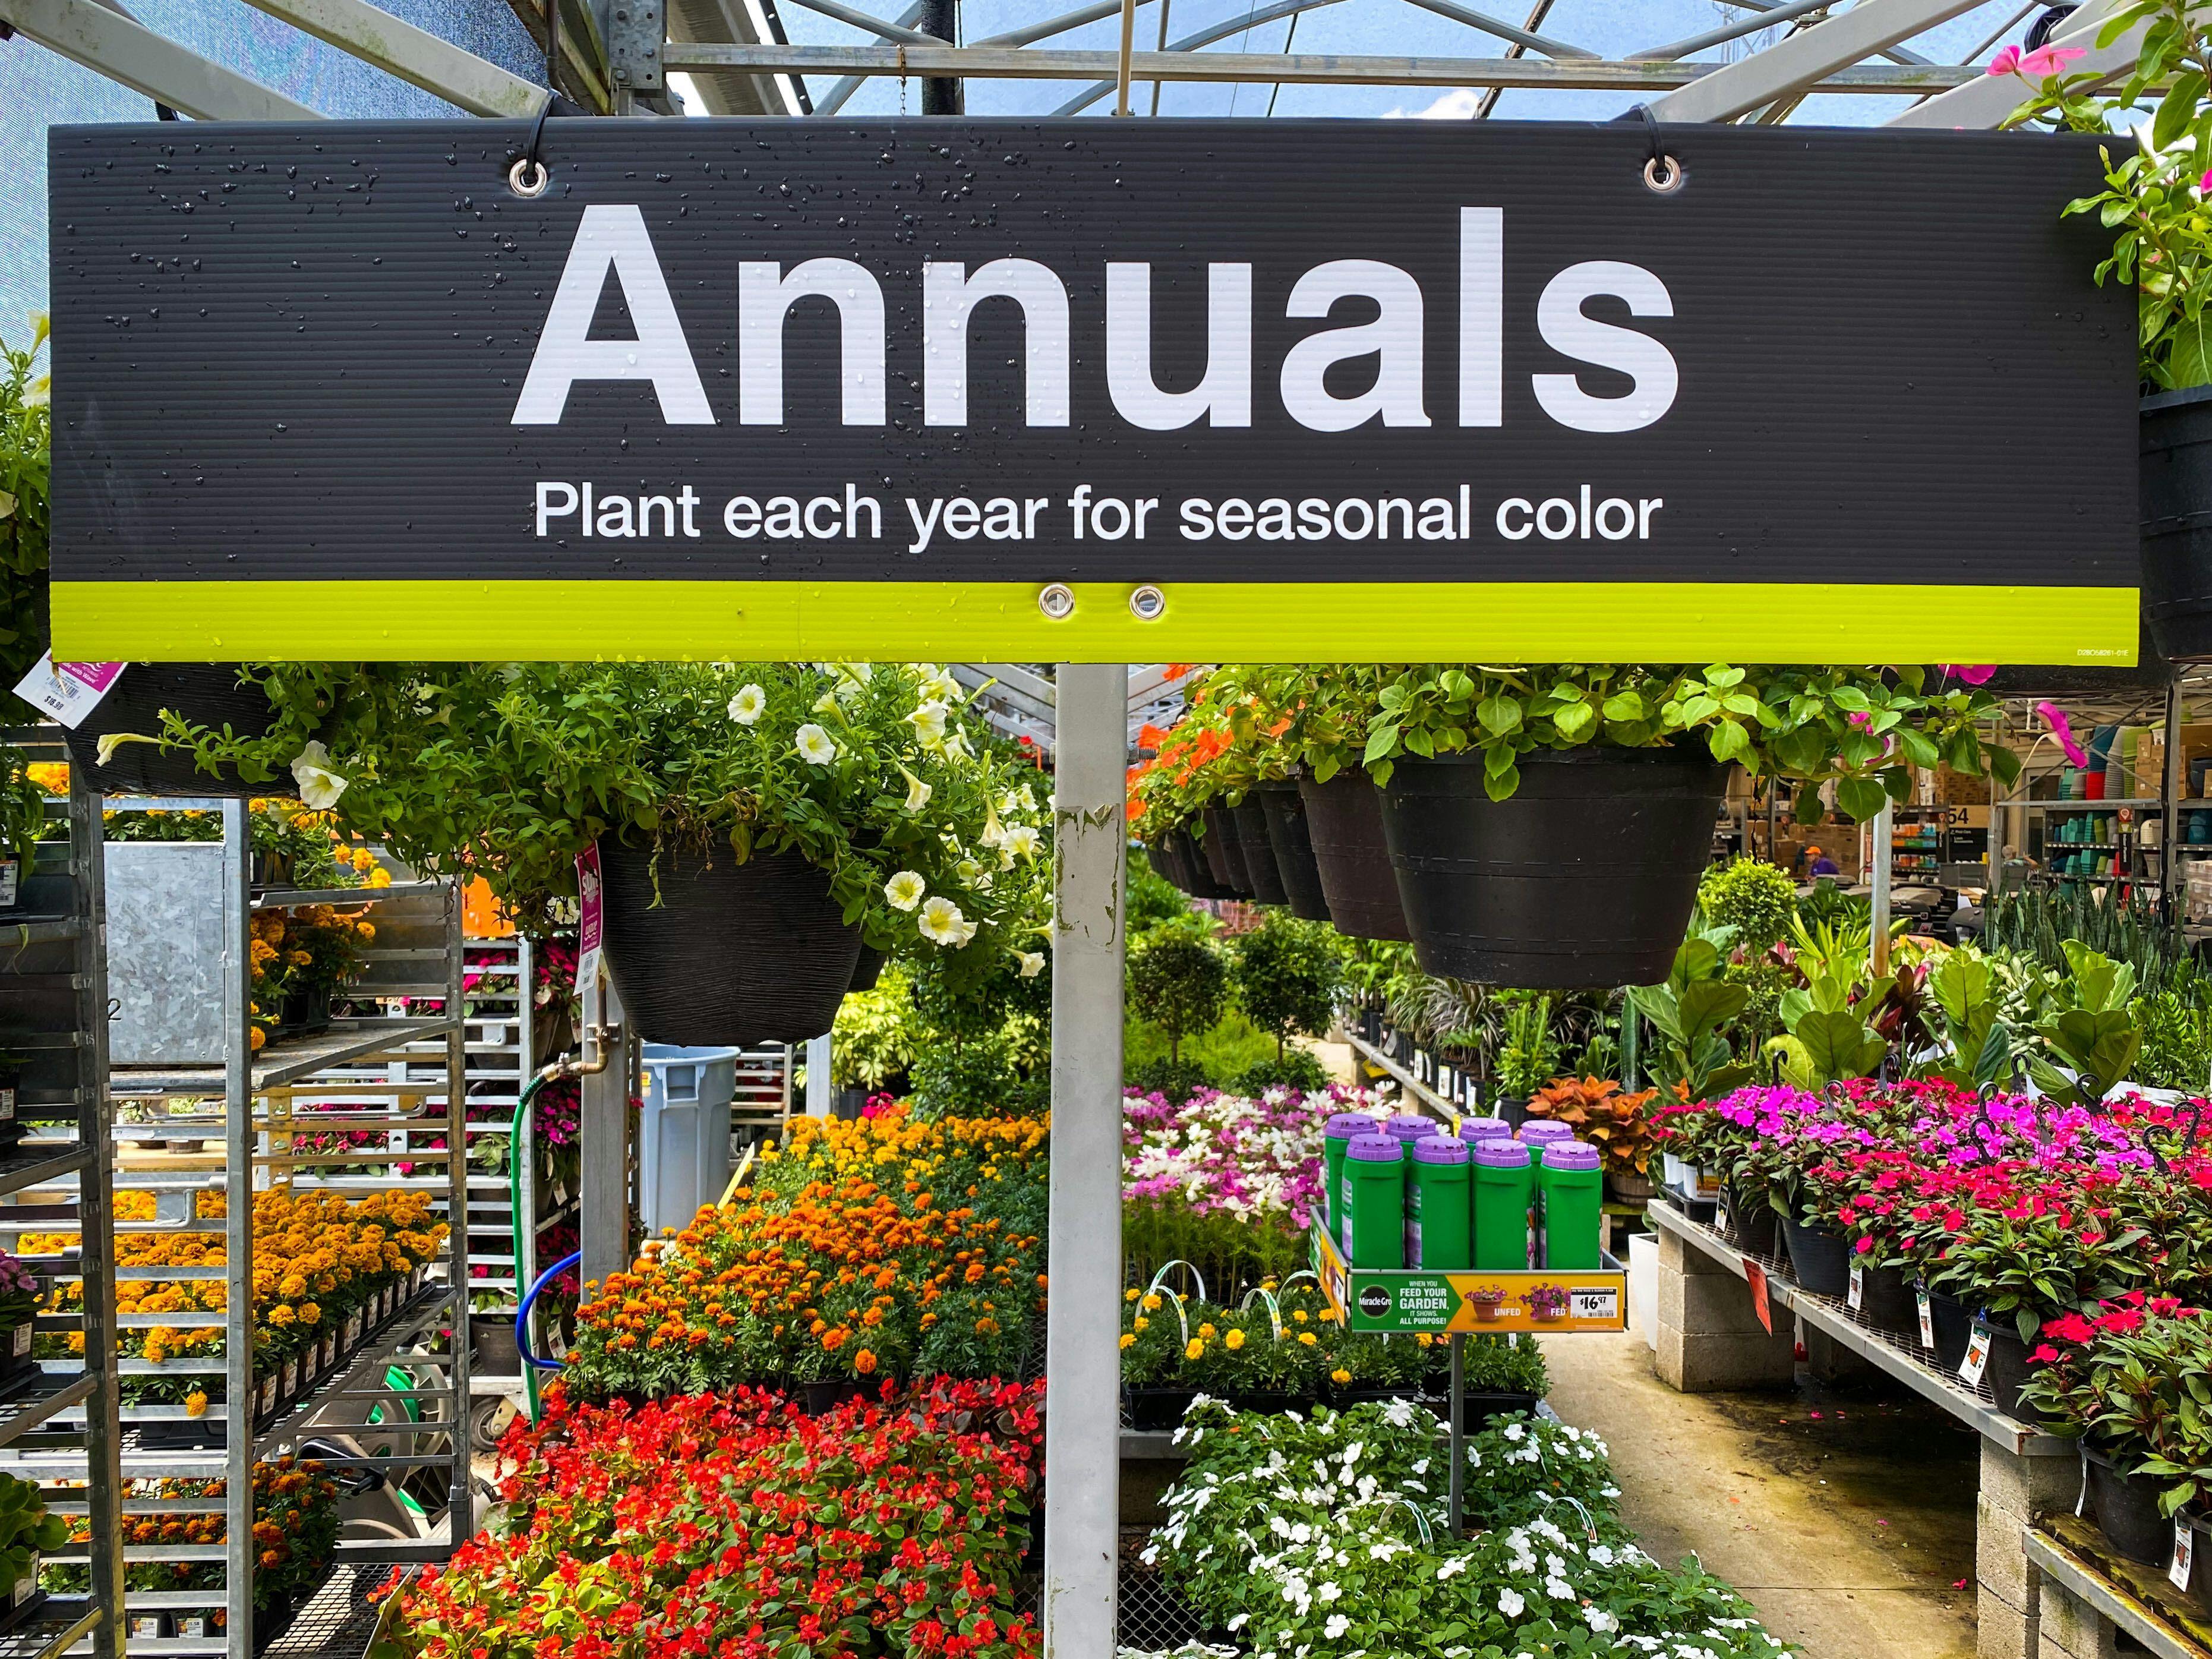 The section of Annual flowers in The Home Depot garden center